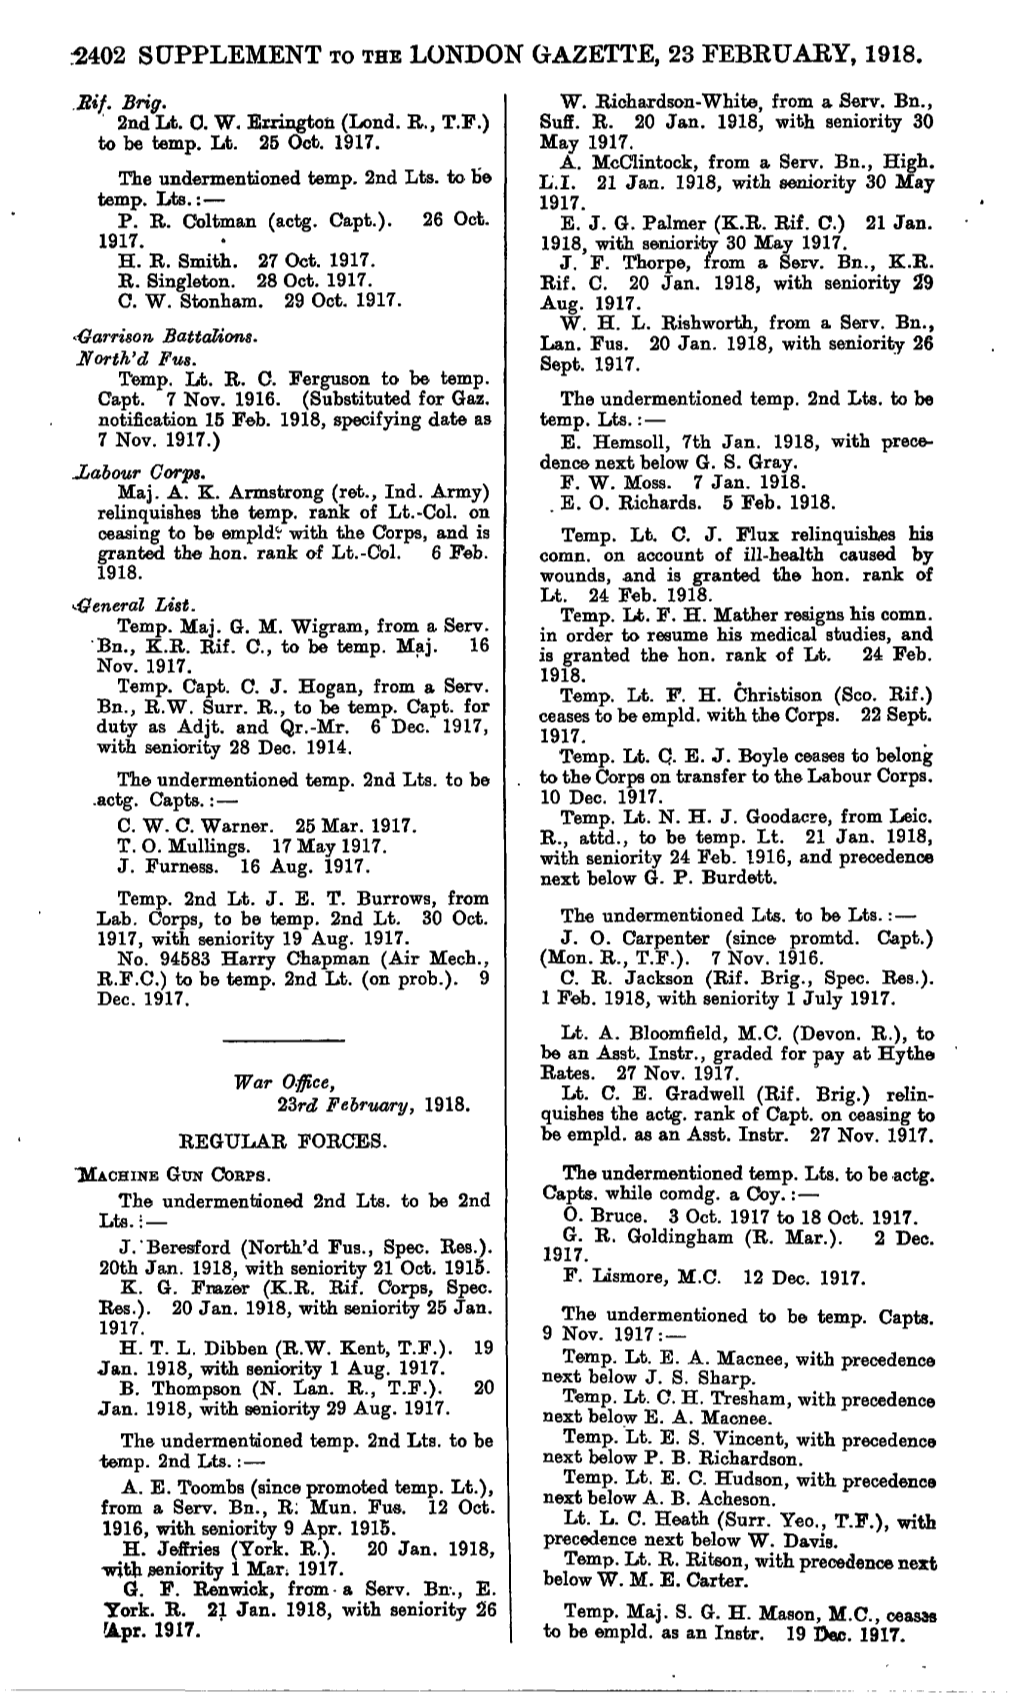 5402 Supplement to the London Gazette, 23 February, 1918